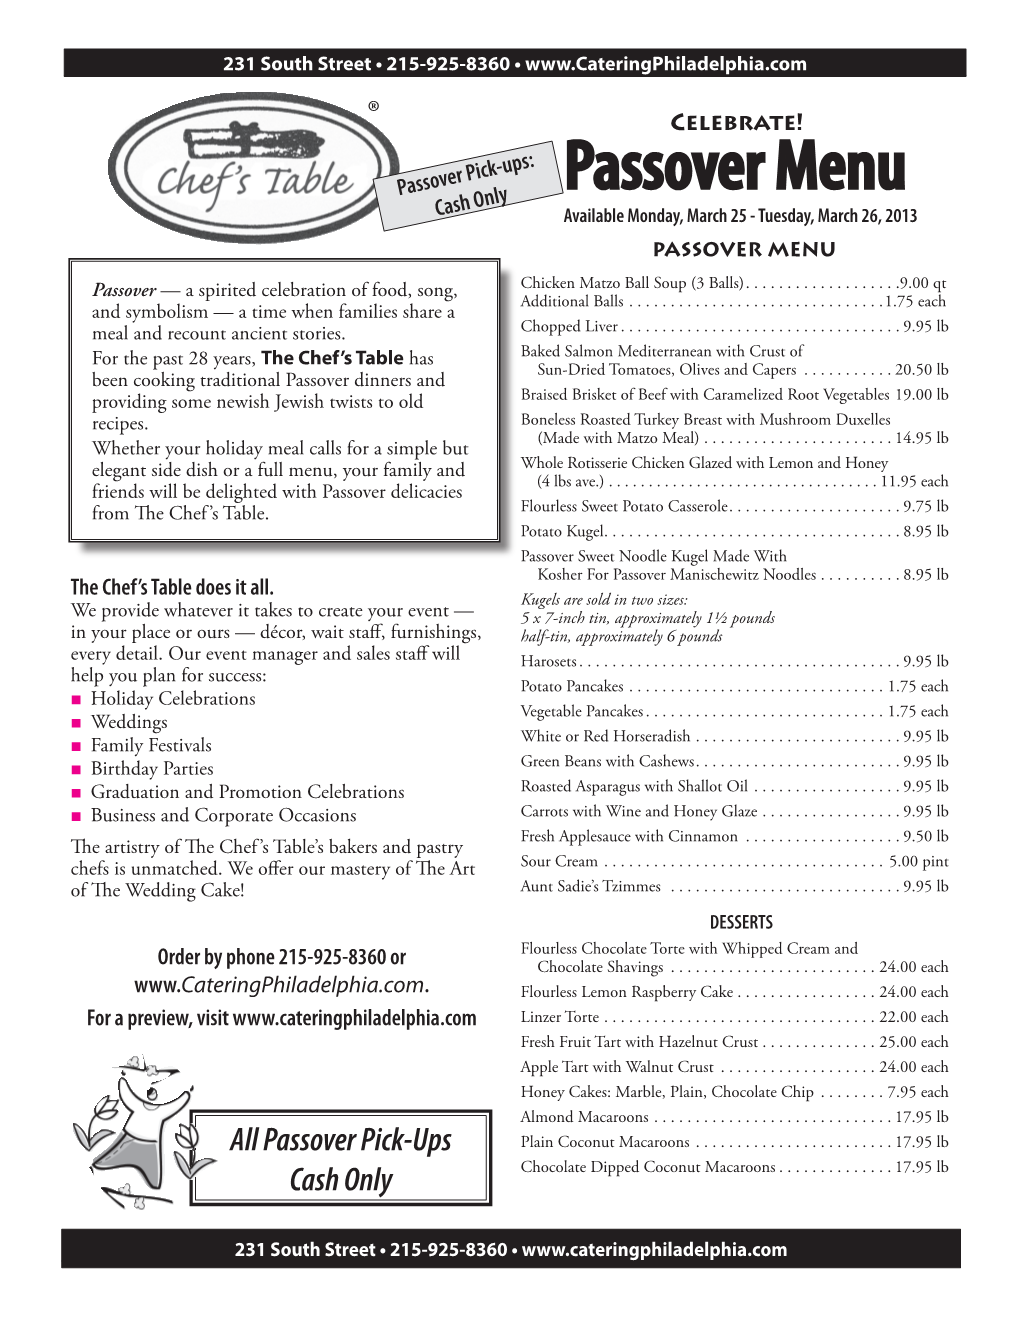 Passover Menu Cash Only Available Monday, March 25 - Tuesday, March 26, 2013 PASSOVER MENU